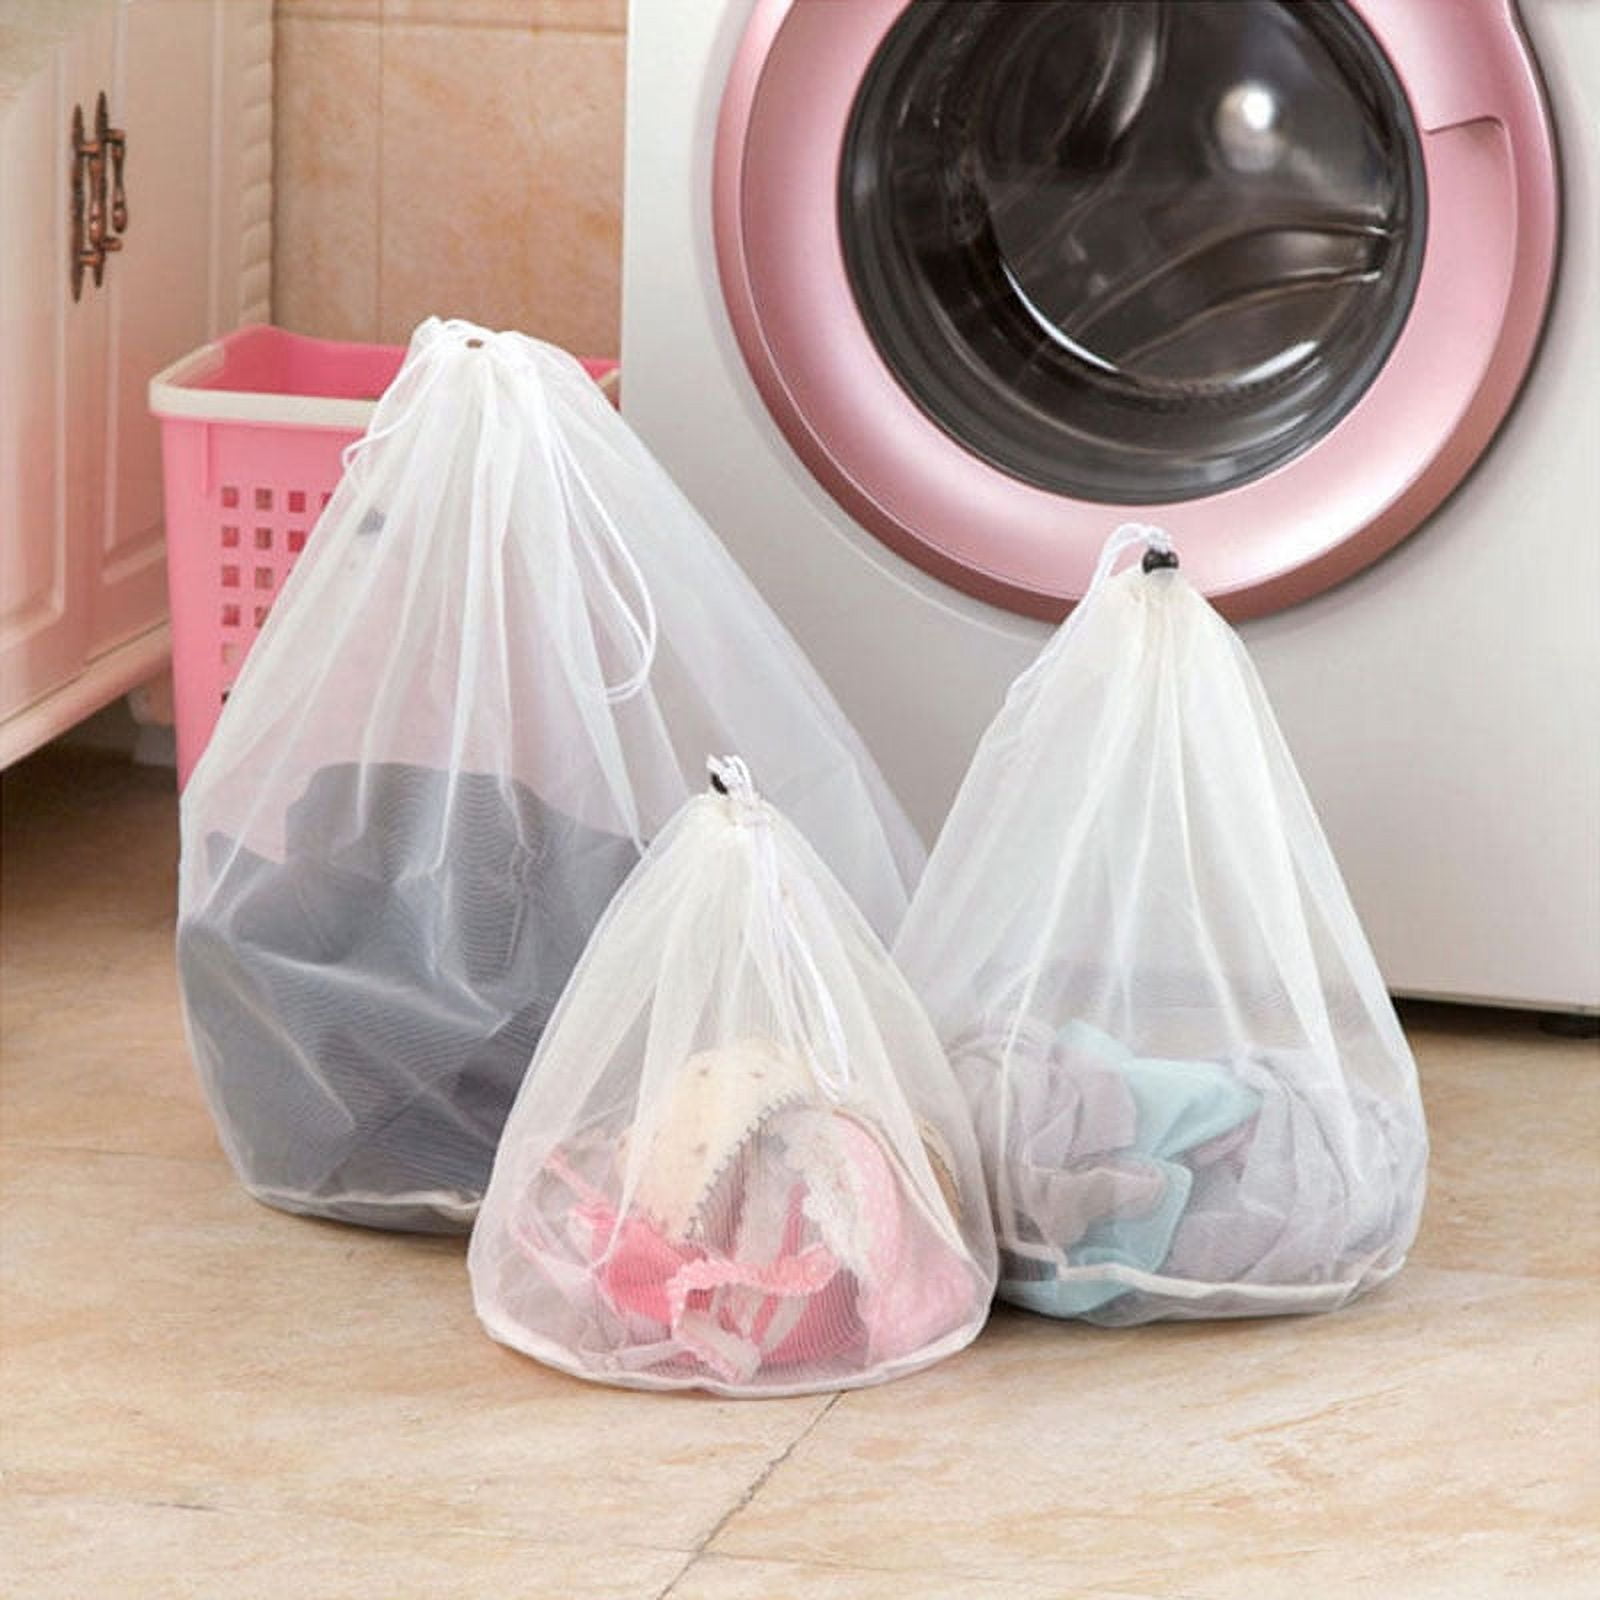 Mesh Laundry Bags for Cloth Washing (Set of 3) - Great for Machine